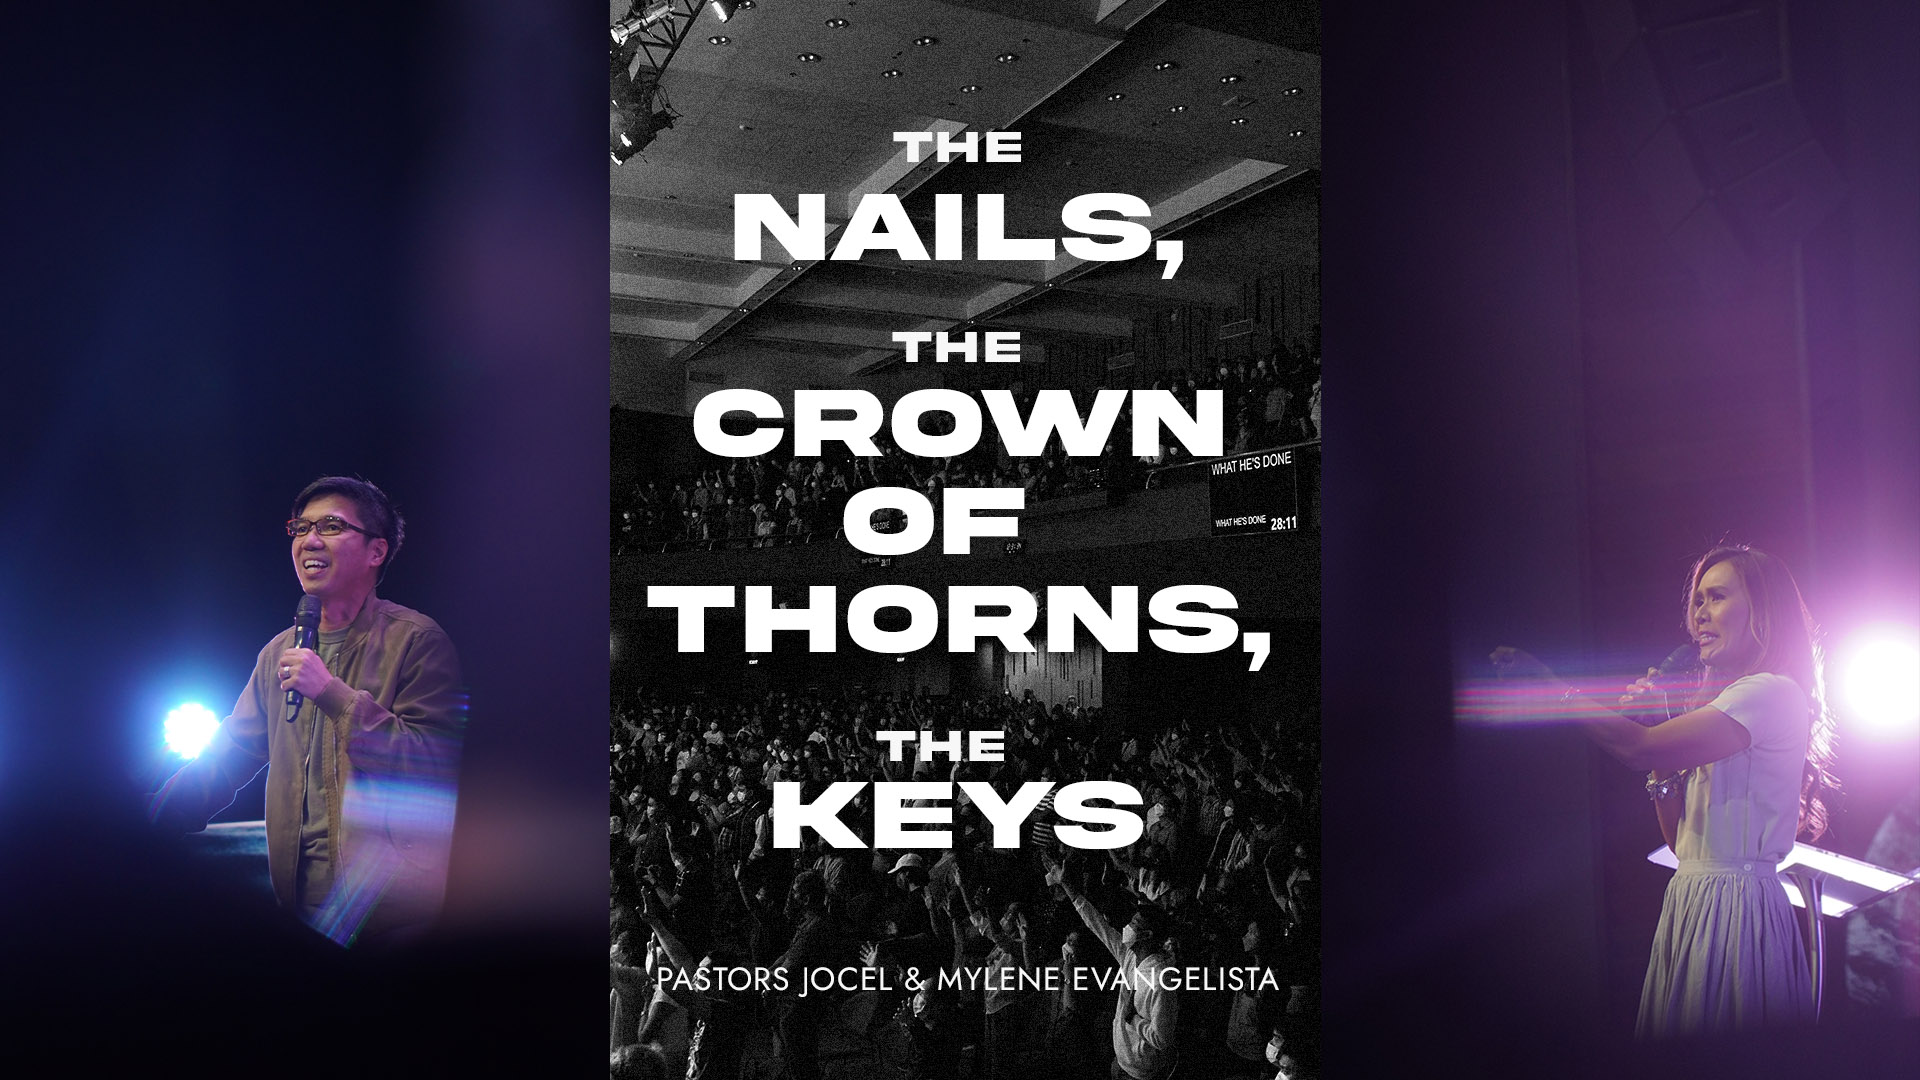 THE NAILS, THE CROWN OF THORNS, AND THE KEYS Image